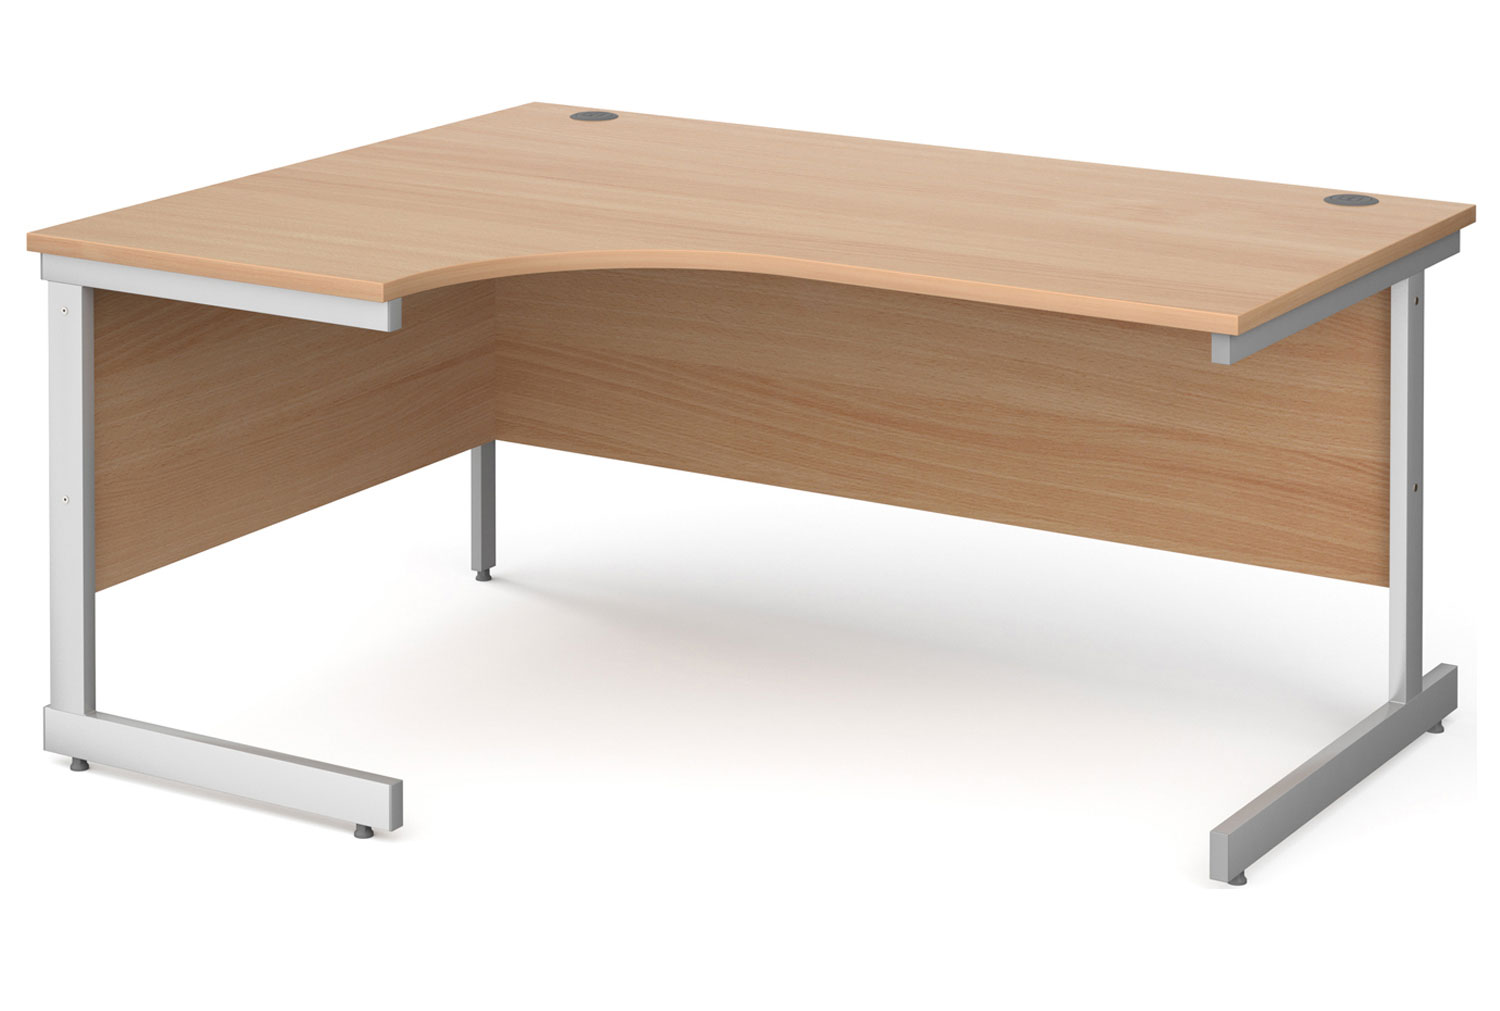 Thrifty Next-Day Left Hand Ergonomic Office Desk Beech, 160wx120/80dx73h (cm), Express Delivery